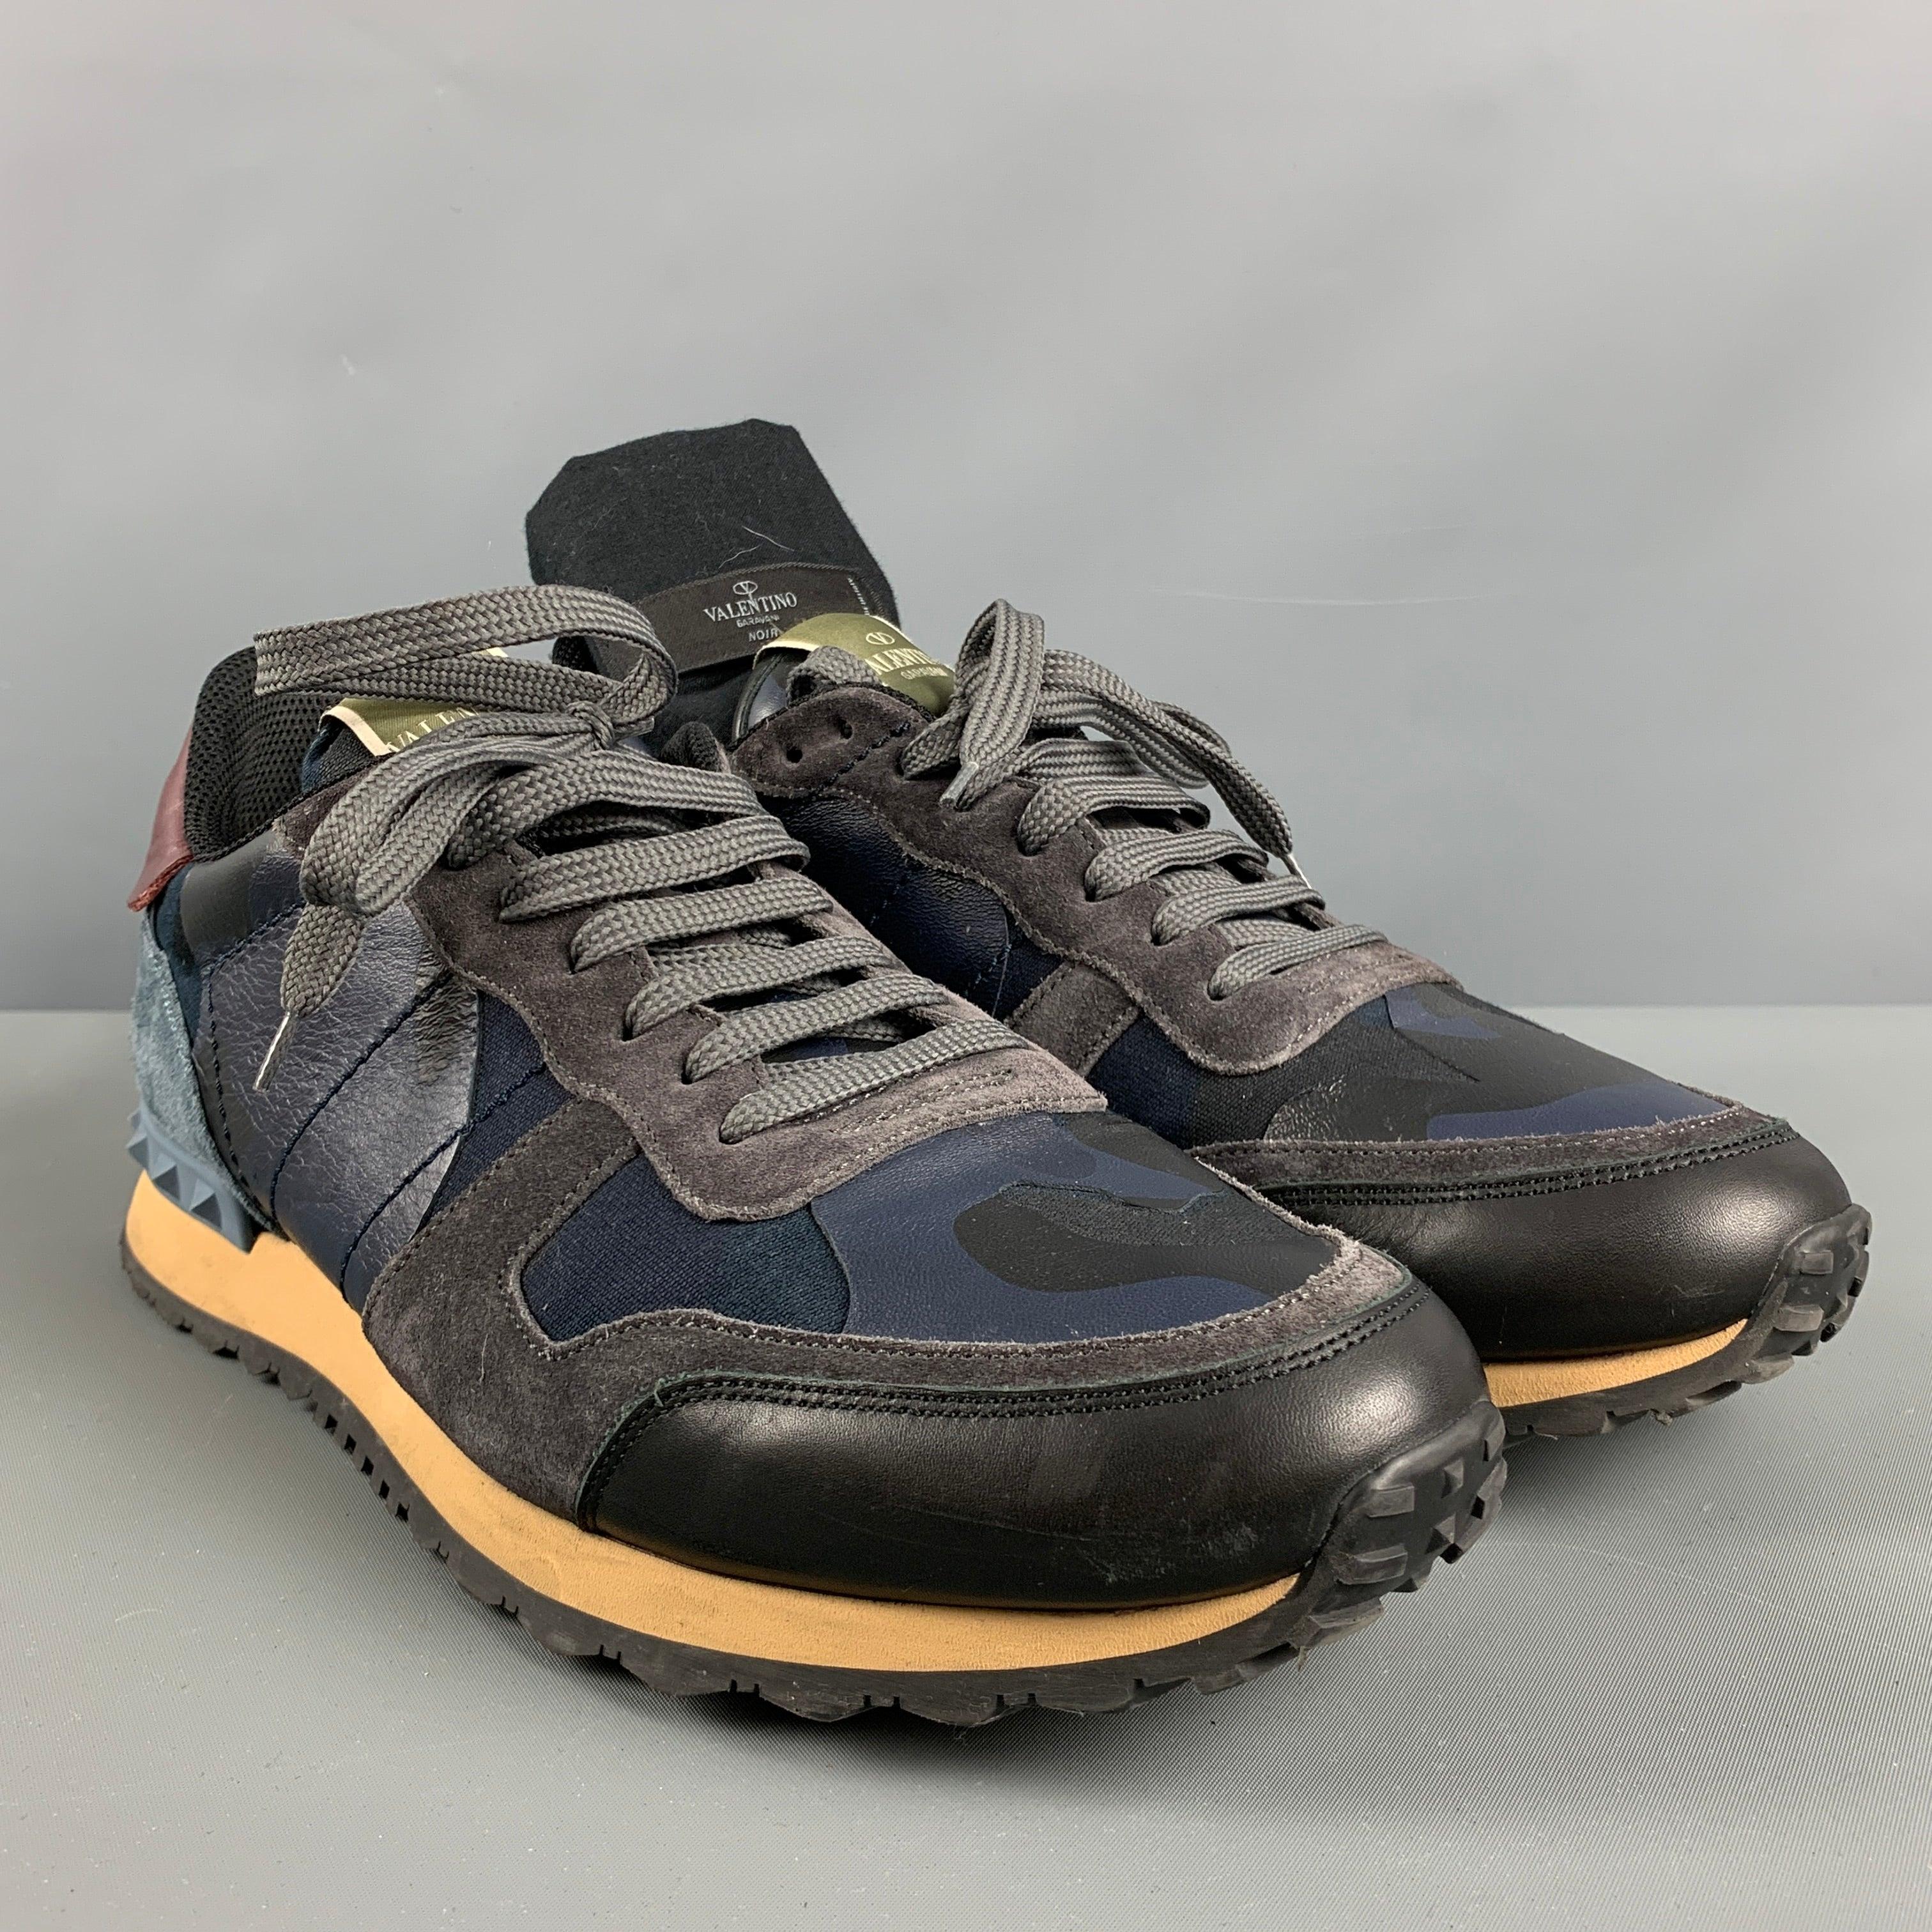 VALENTINO rock runner sneakers comes in a navy suede & leather featuring rubber stud details, color blocking design, and a lace up closure. Comes with Dust Bag. Made in Italy.Very Good Pre-Owned Condition. 

Marked:   TH723 44Outsole: 12.5 inches  x